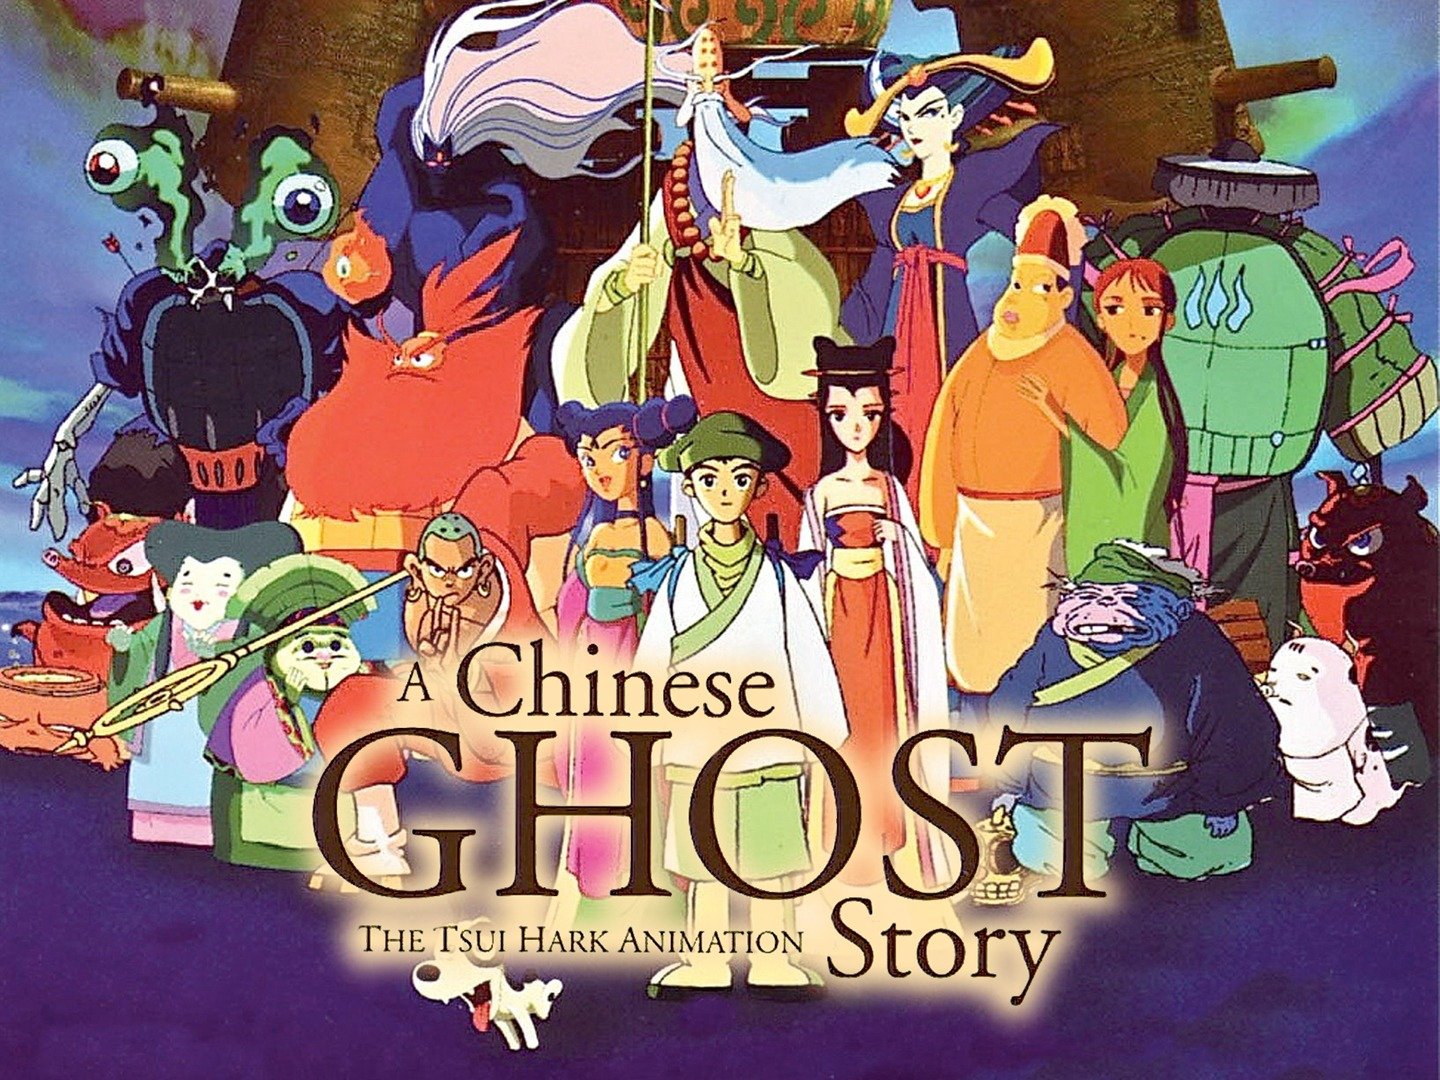 a chinese ghost story (the tsui hark animation)